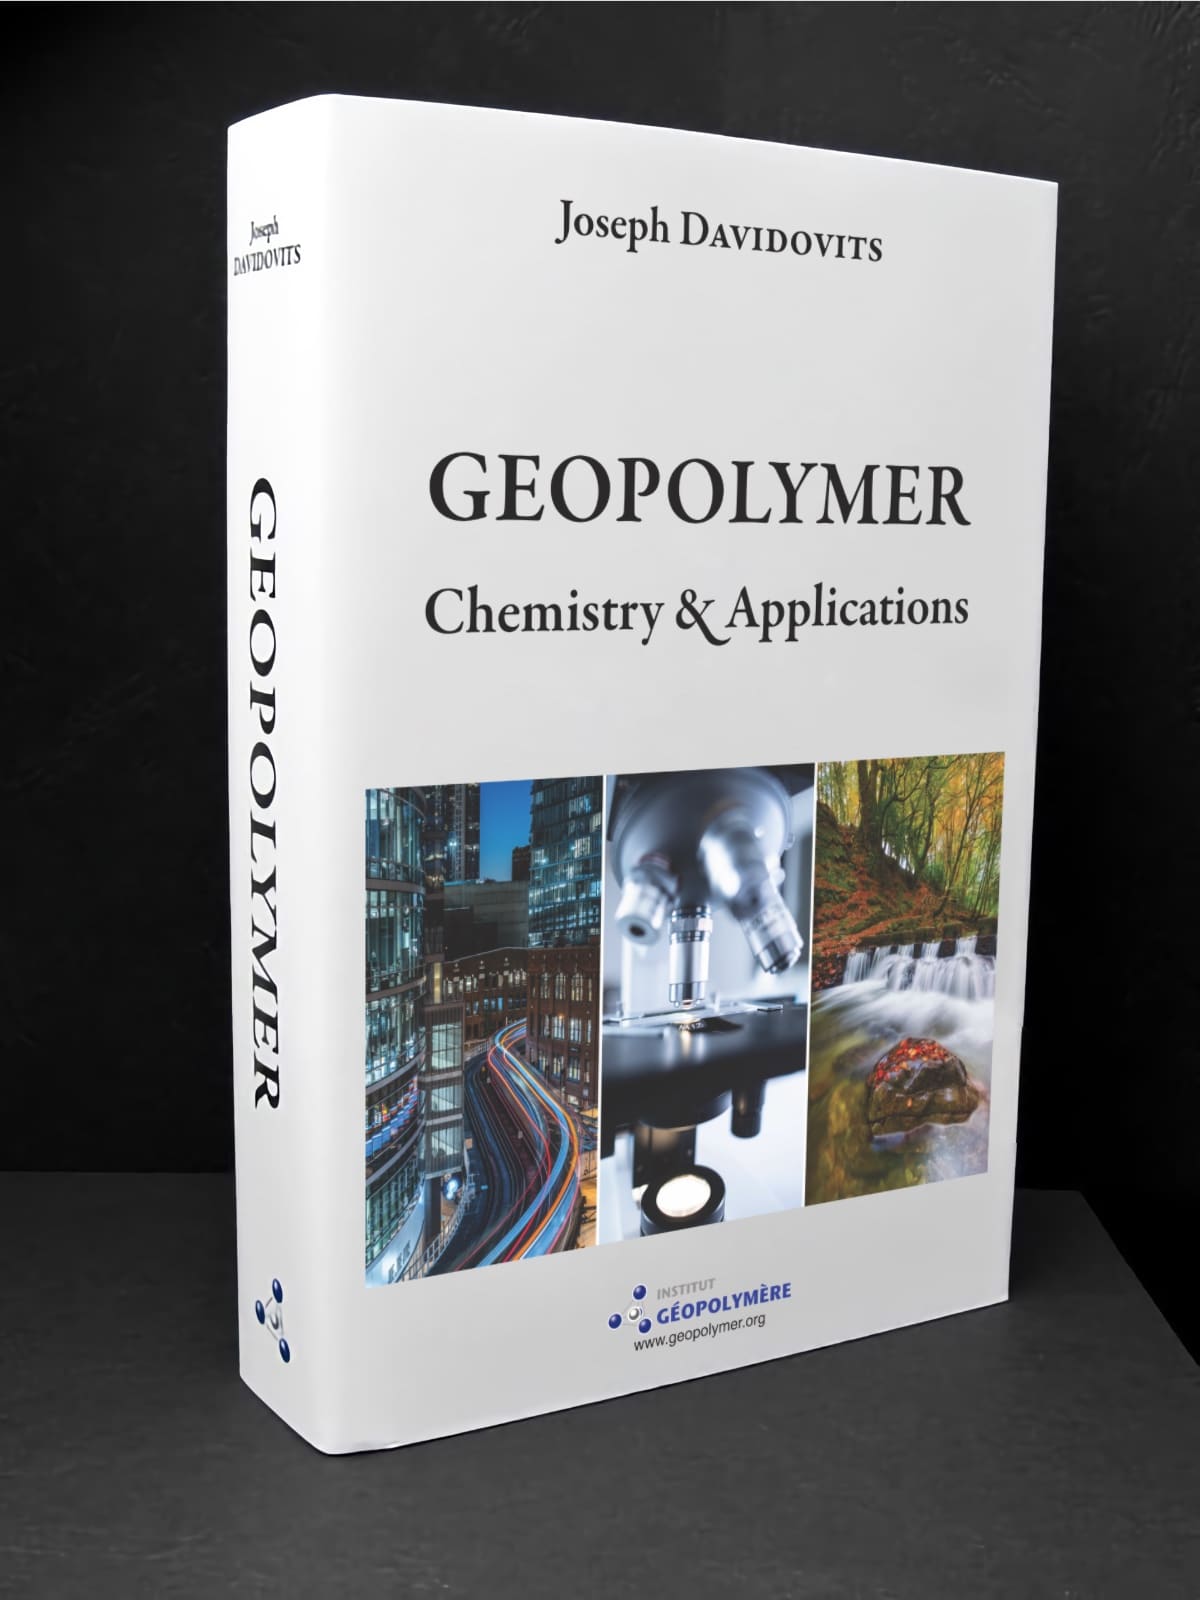 Geopolymer Chemistry and Applications, 5th ed. Geopolymer Institute Shop